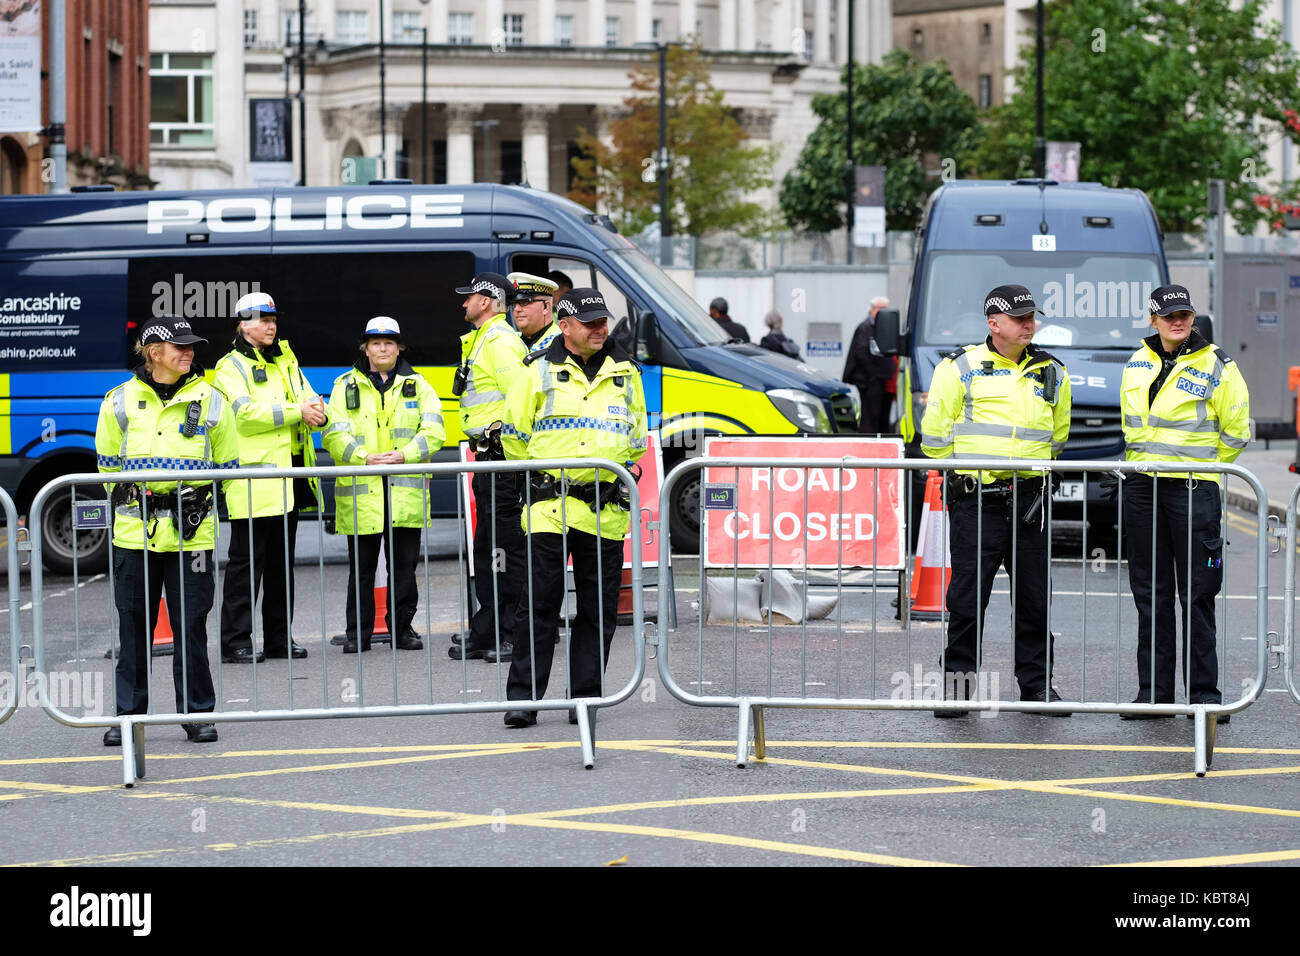 Central Manchester UK, Sunday 1st October 2017 - Police block the approaches to the Conservative Party Conference zone in the city centre on the opening day of the Conservative Party Conference. Steven May / Alamy Live News Stock Photo